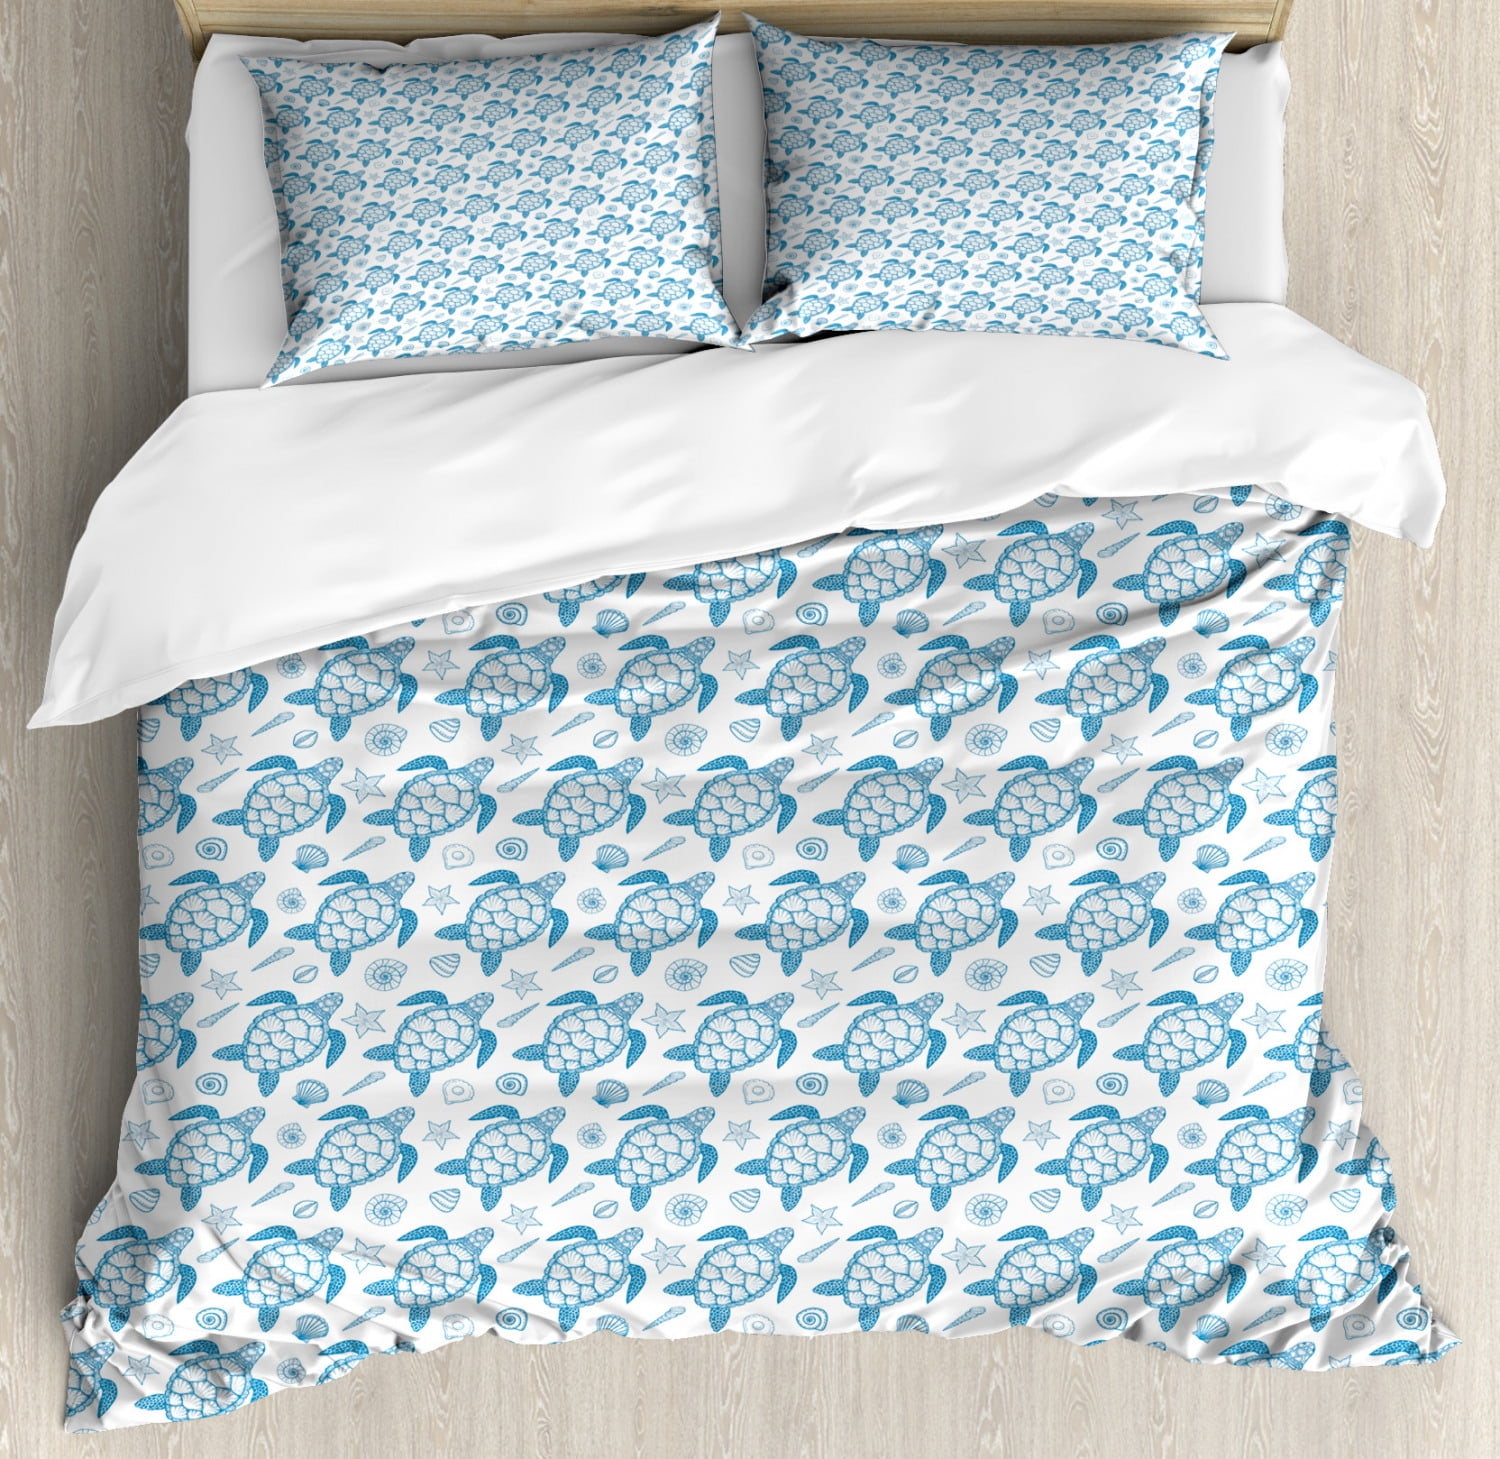 Ocean Turtles 3-piece Bedding Set Duvet Cover Blue And White Color King Size 